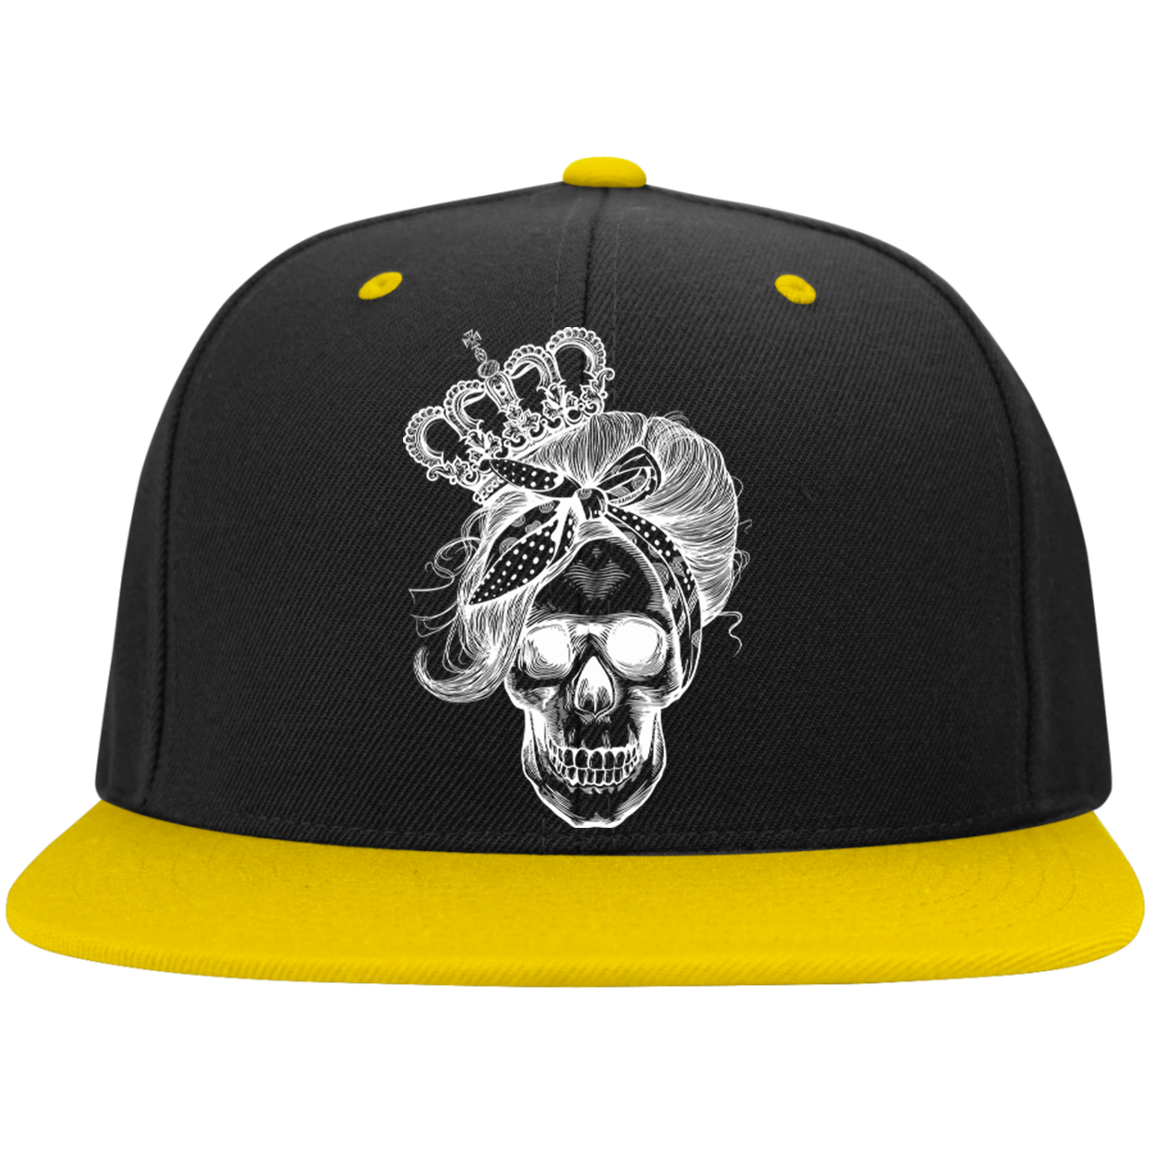 LONG LIVE THE QUEEN SKULL High-Profile Snapback Hat